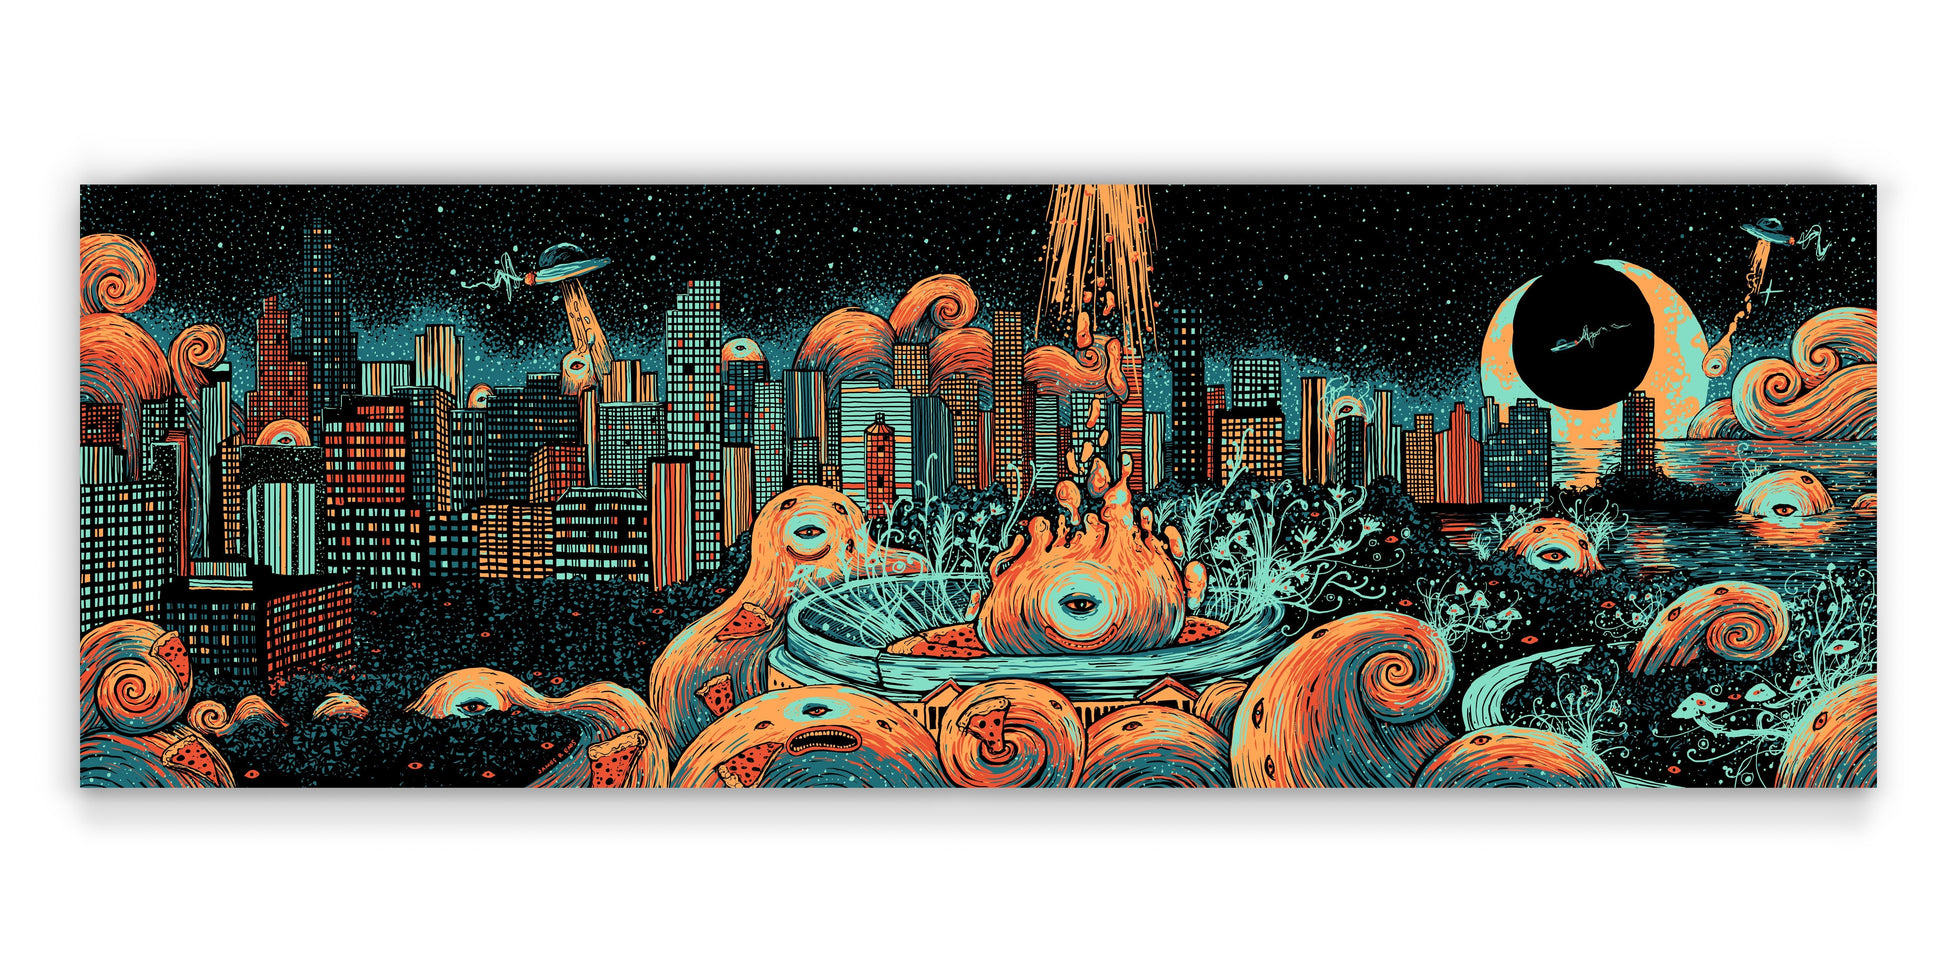 Pizza Party (AP Edition of 50) Print James R. Eads